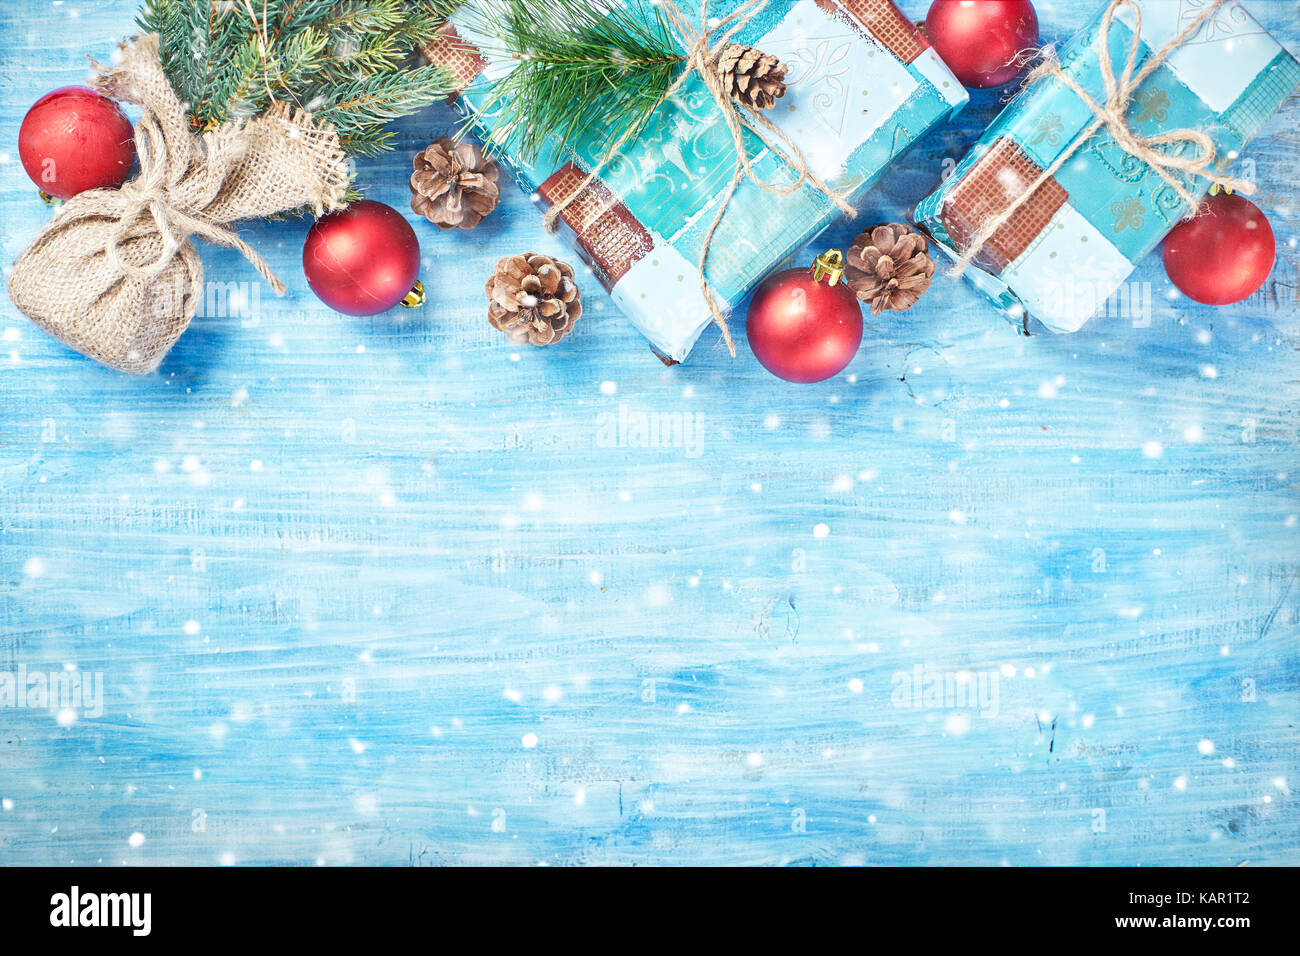 Top view of Christmas background on blue wooden board with fir, red decorations, snow and gift boxes forming top rim. Copy space. Stock Photo